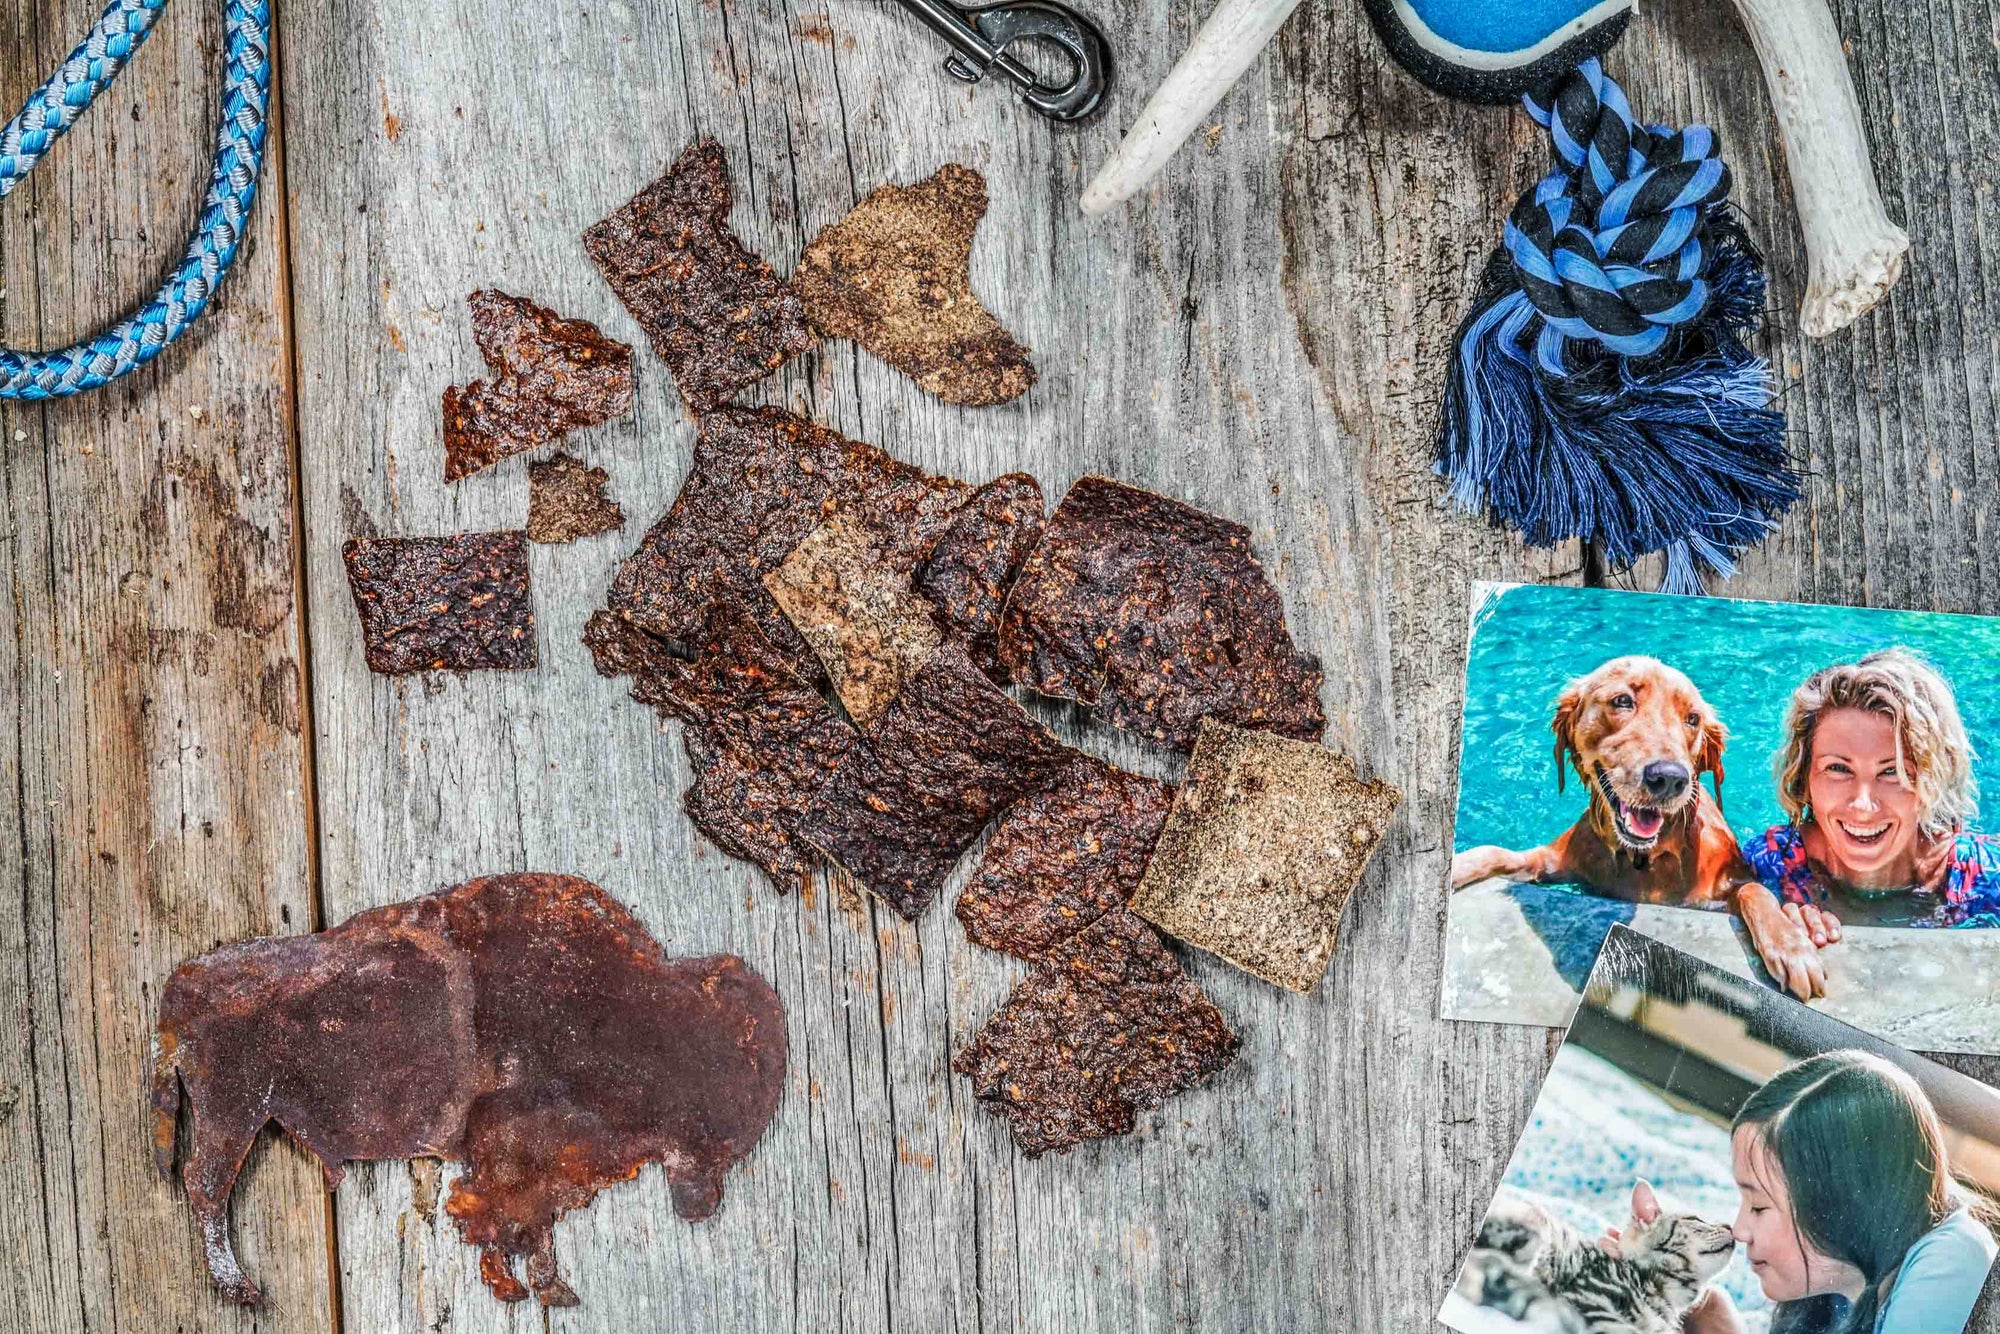 bison liver chips natural preservative-free no preservatives dried heart organ treat treats 100% grass fed and finished humanely harvested as nature intended Northstar Bison Dr. Becker's Bites Becker Buffalo rabbit 